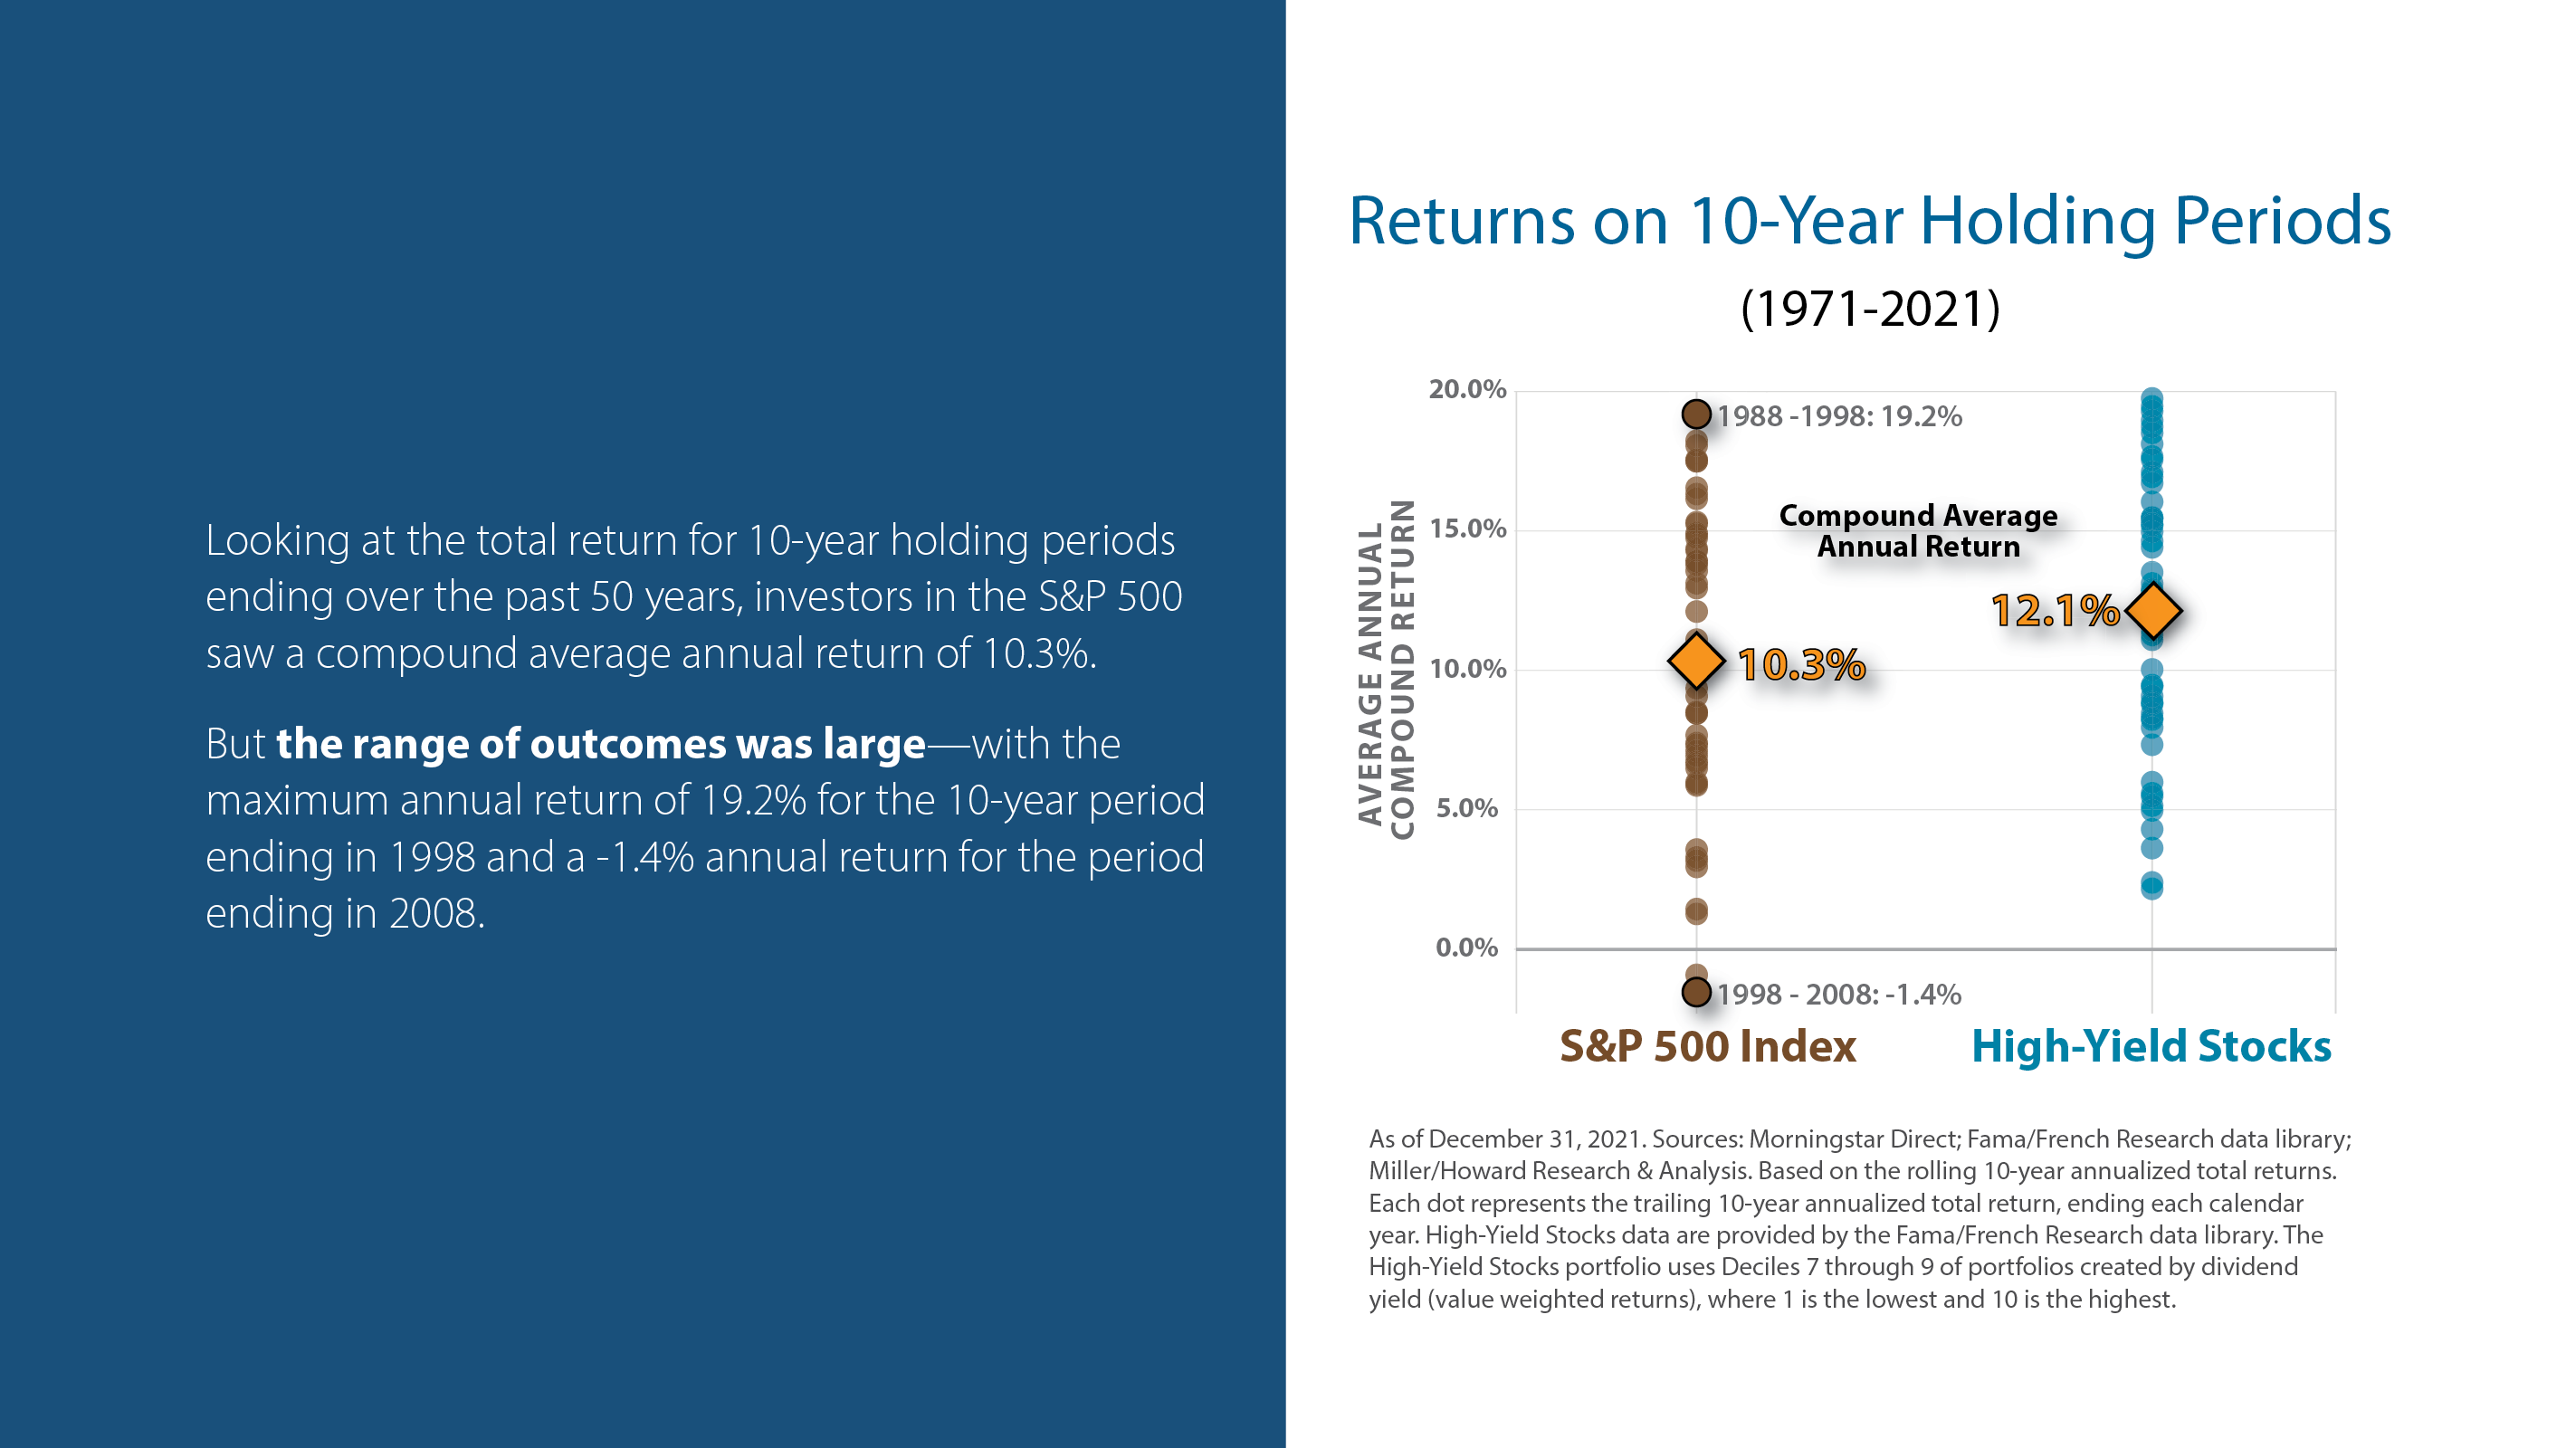 Returns on 10-Year Holding Periods